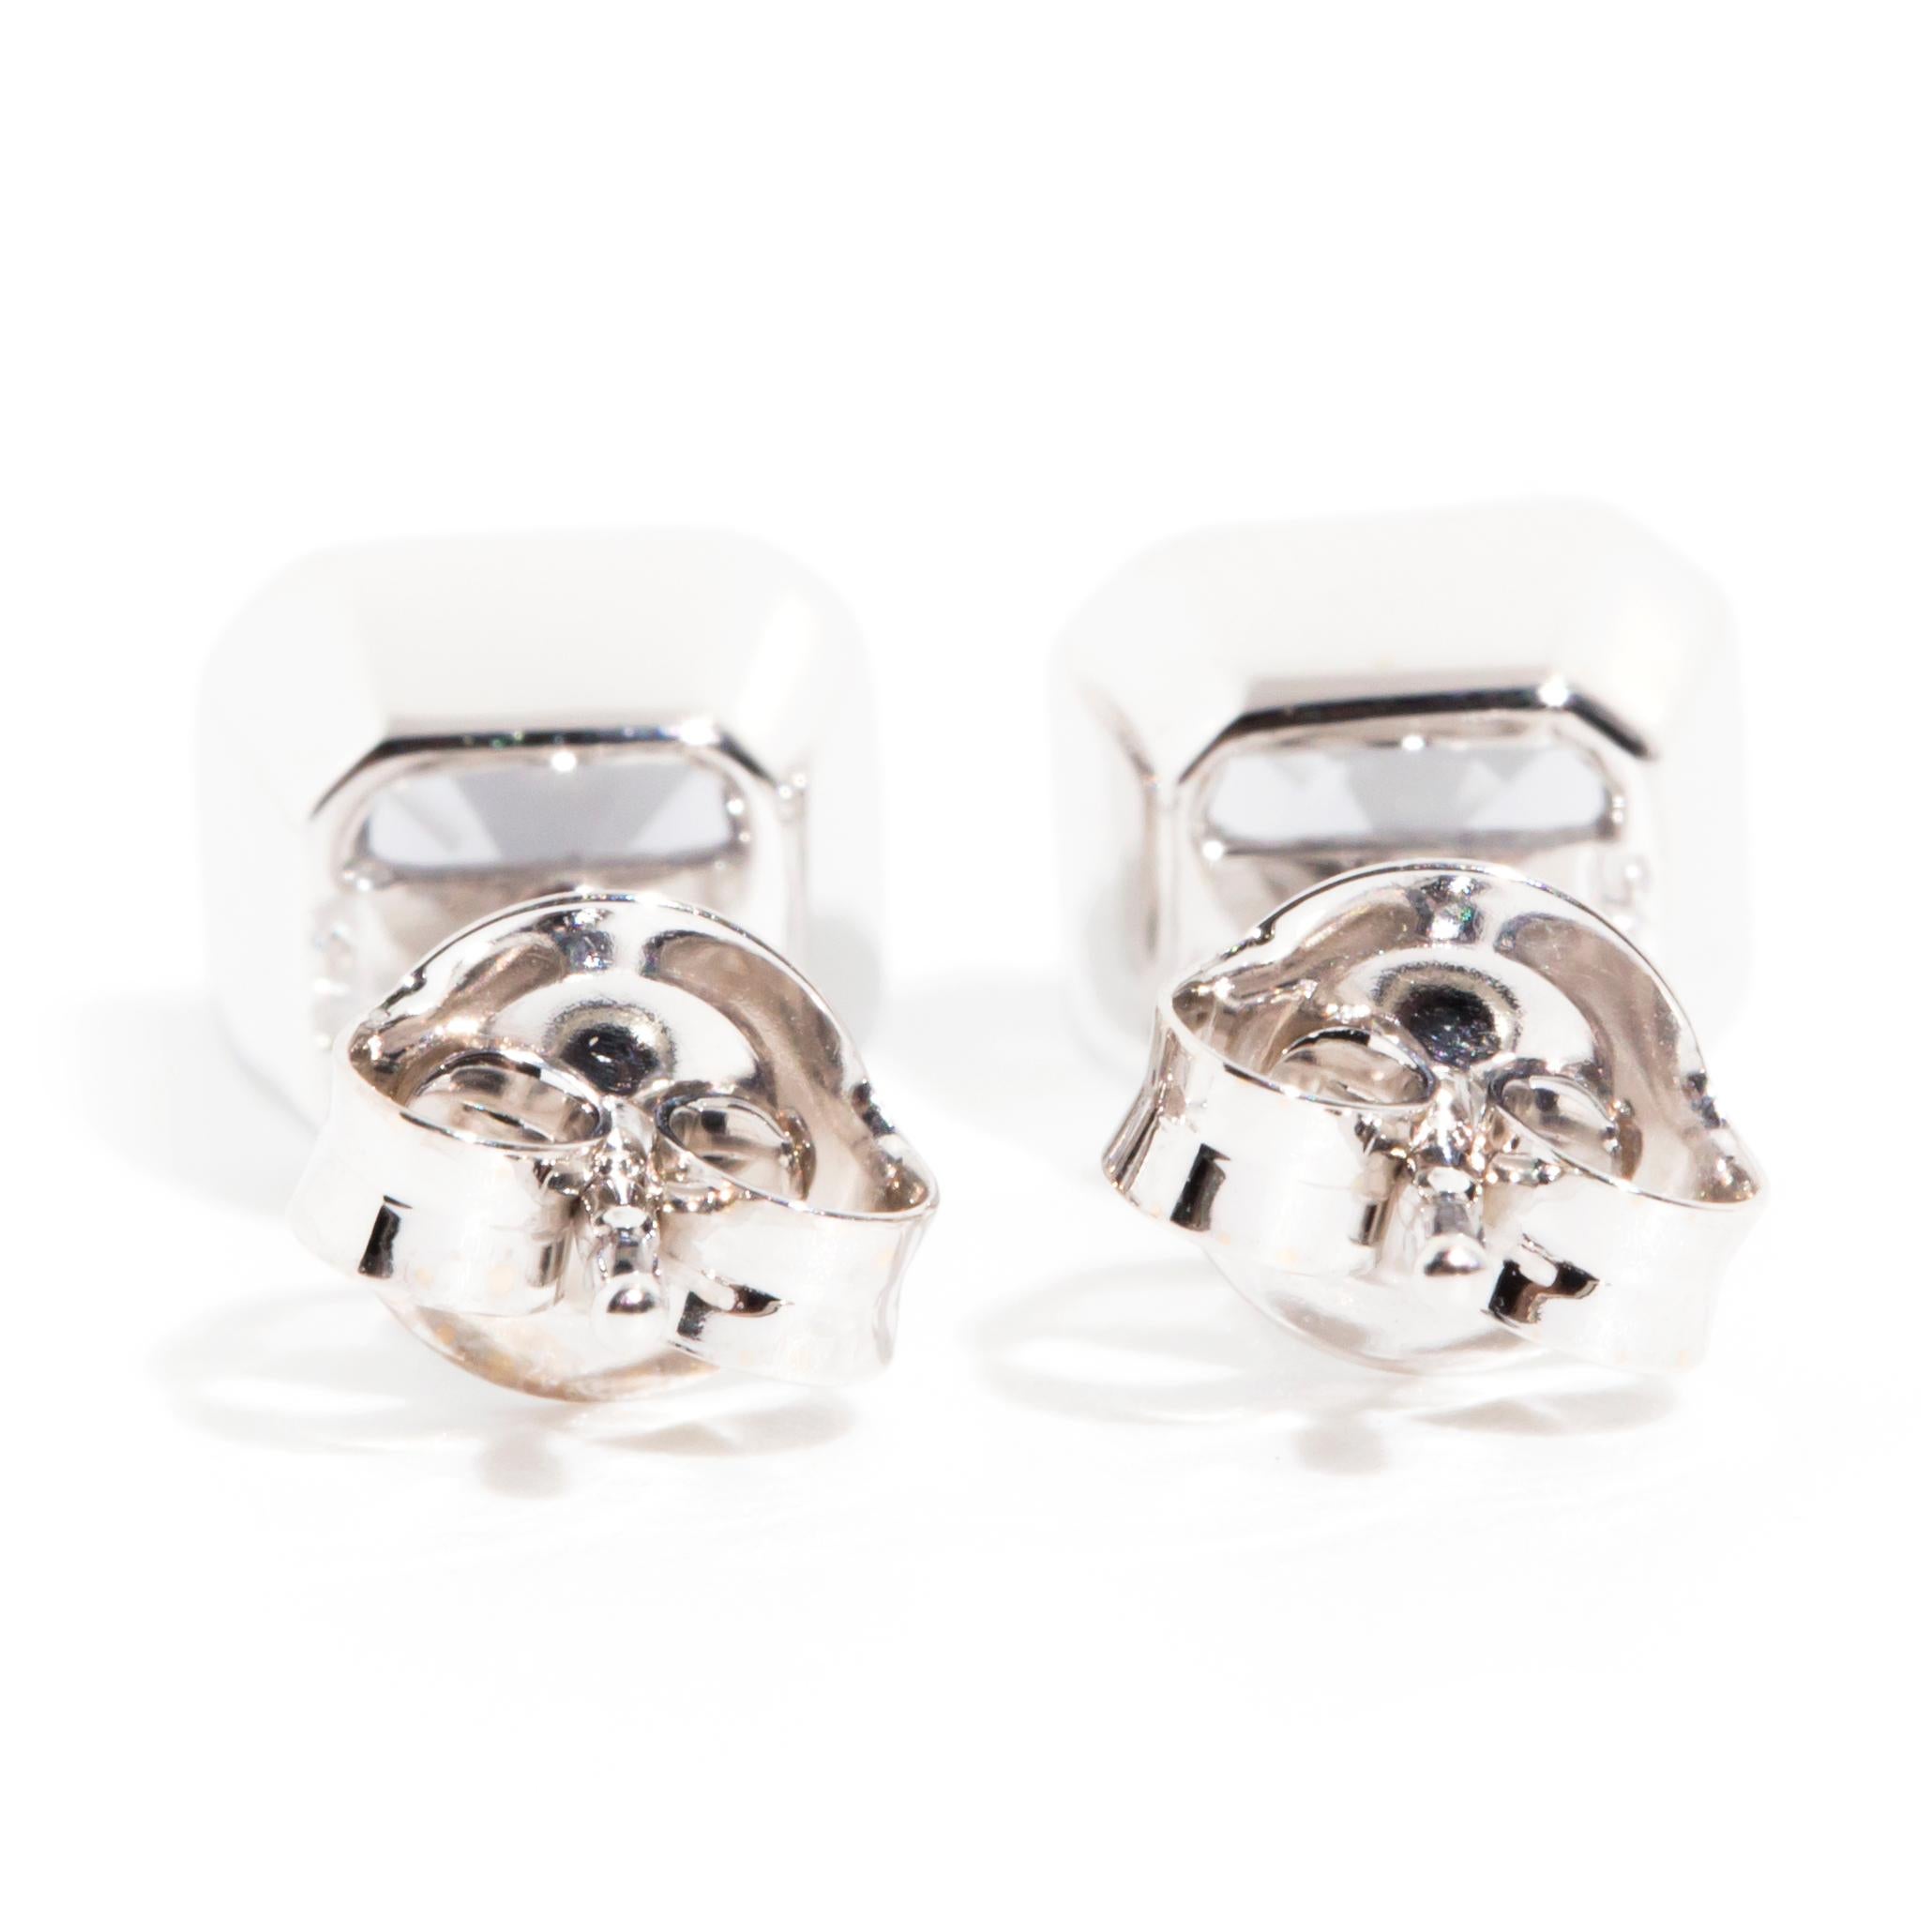 Blue Grey Spinel Contemporary Stud Style Earrings in 9 Carat White Gold 2